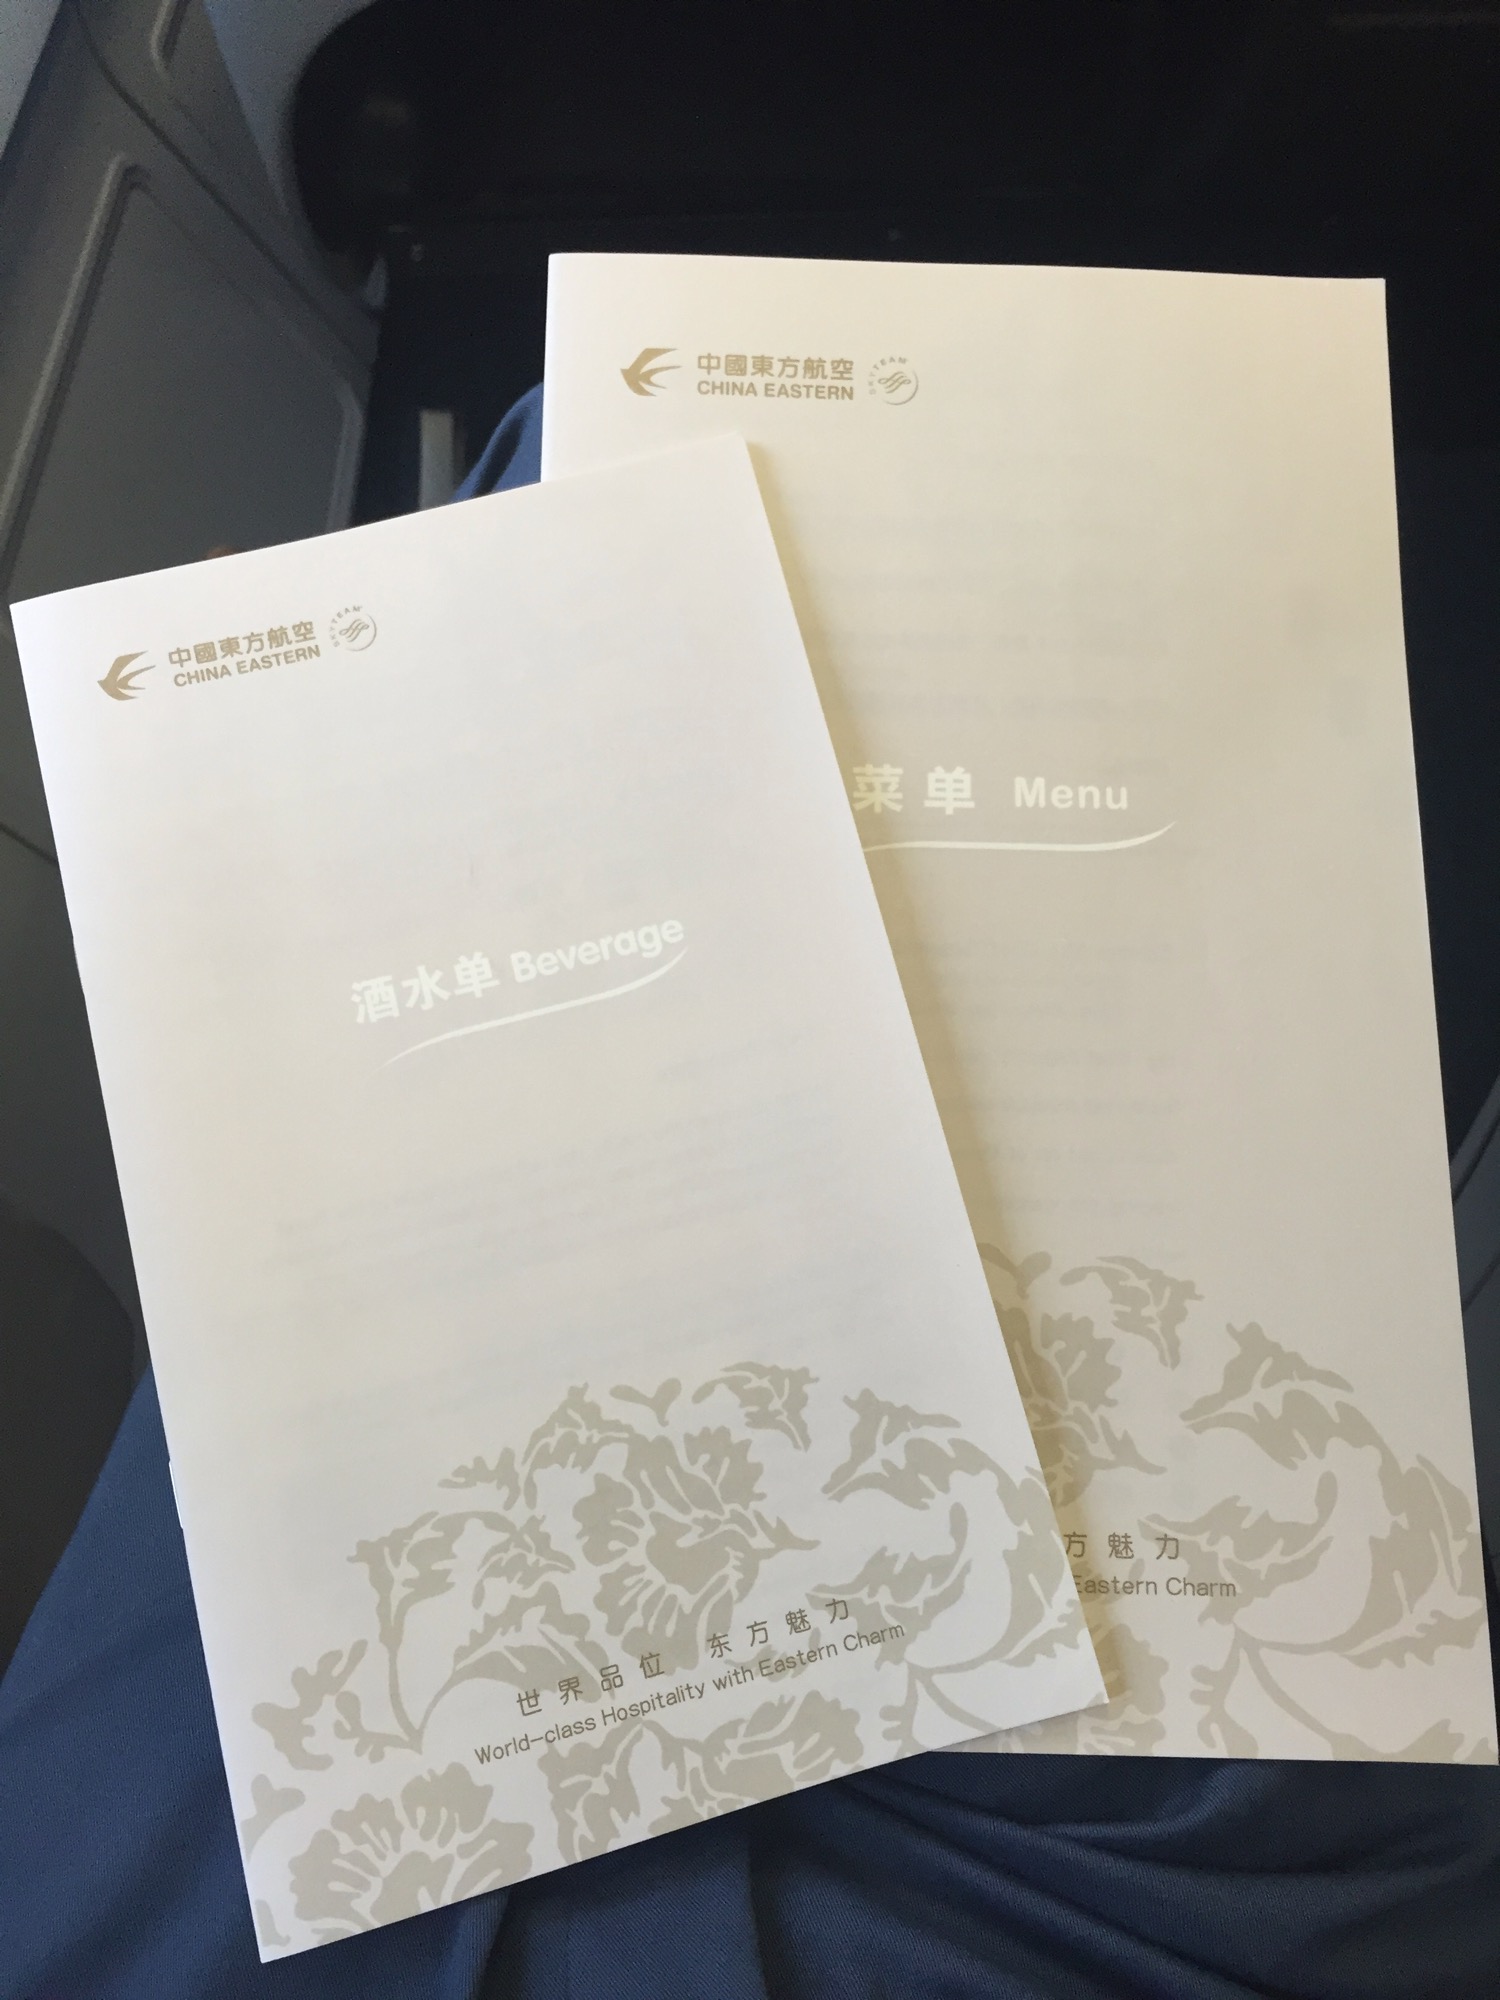 a couple of white paper with text on it